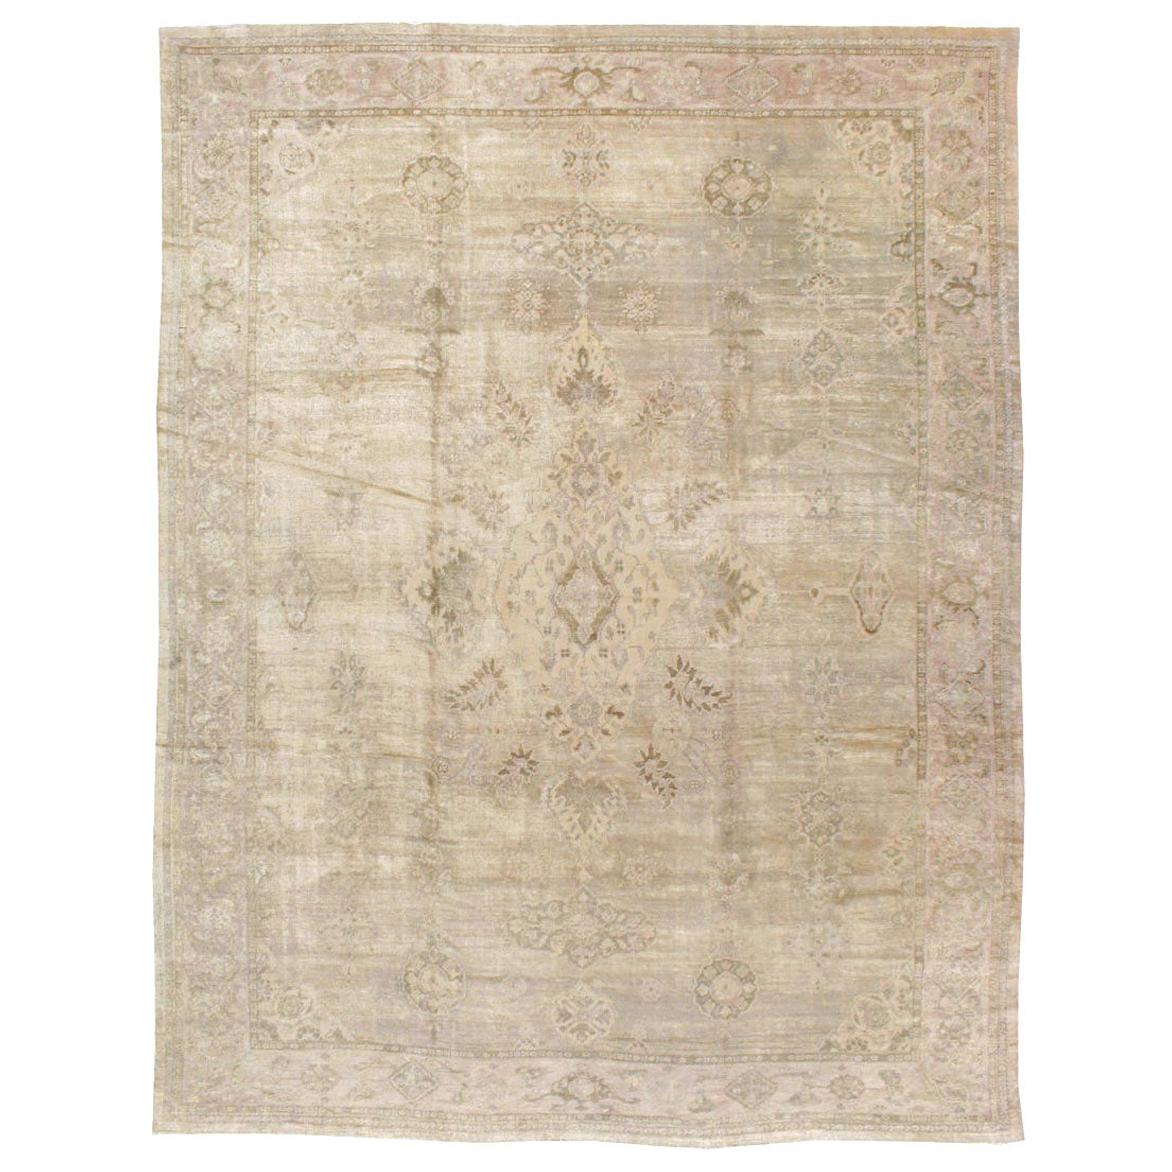 Early 20th Century Handmade Persian Sultanabad Room Size Carpet